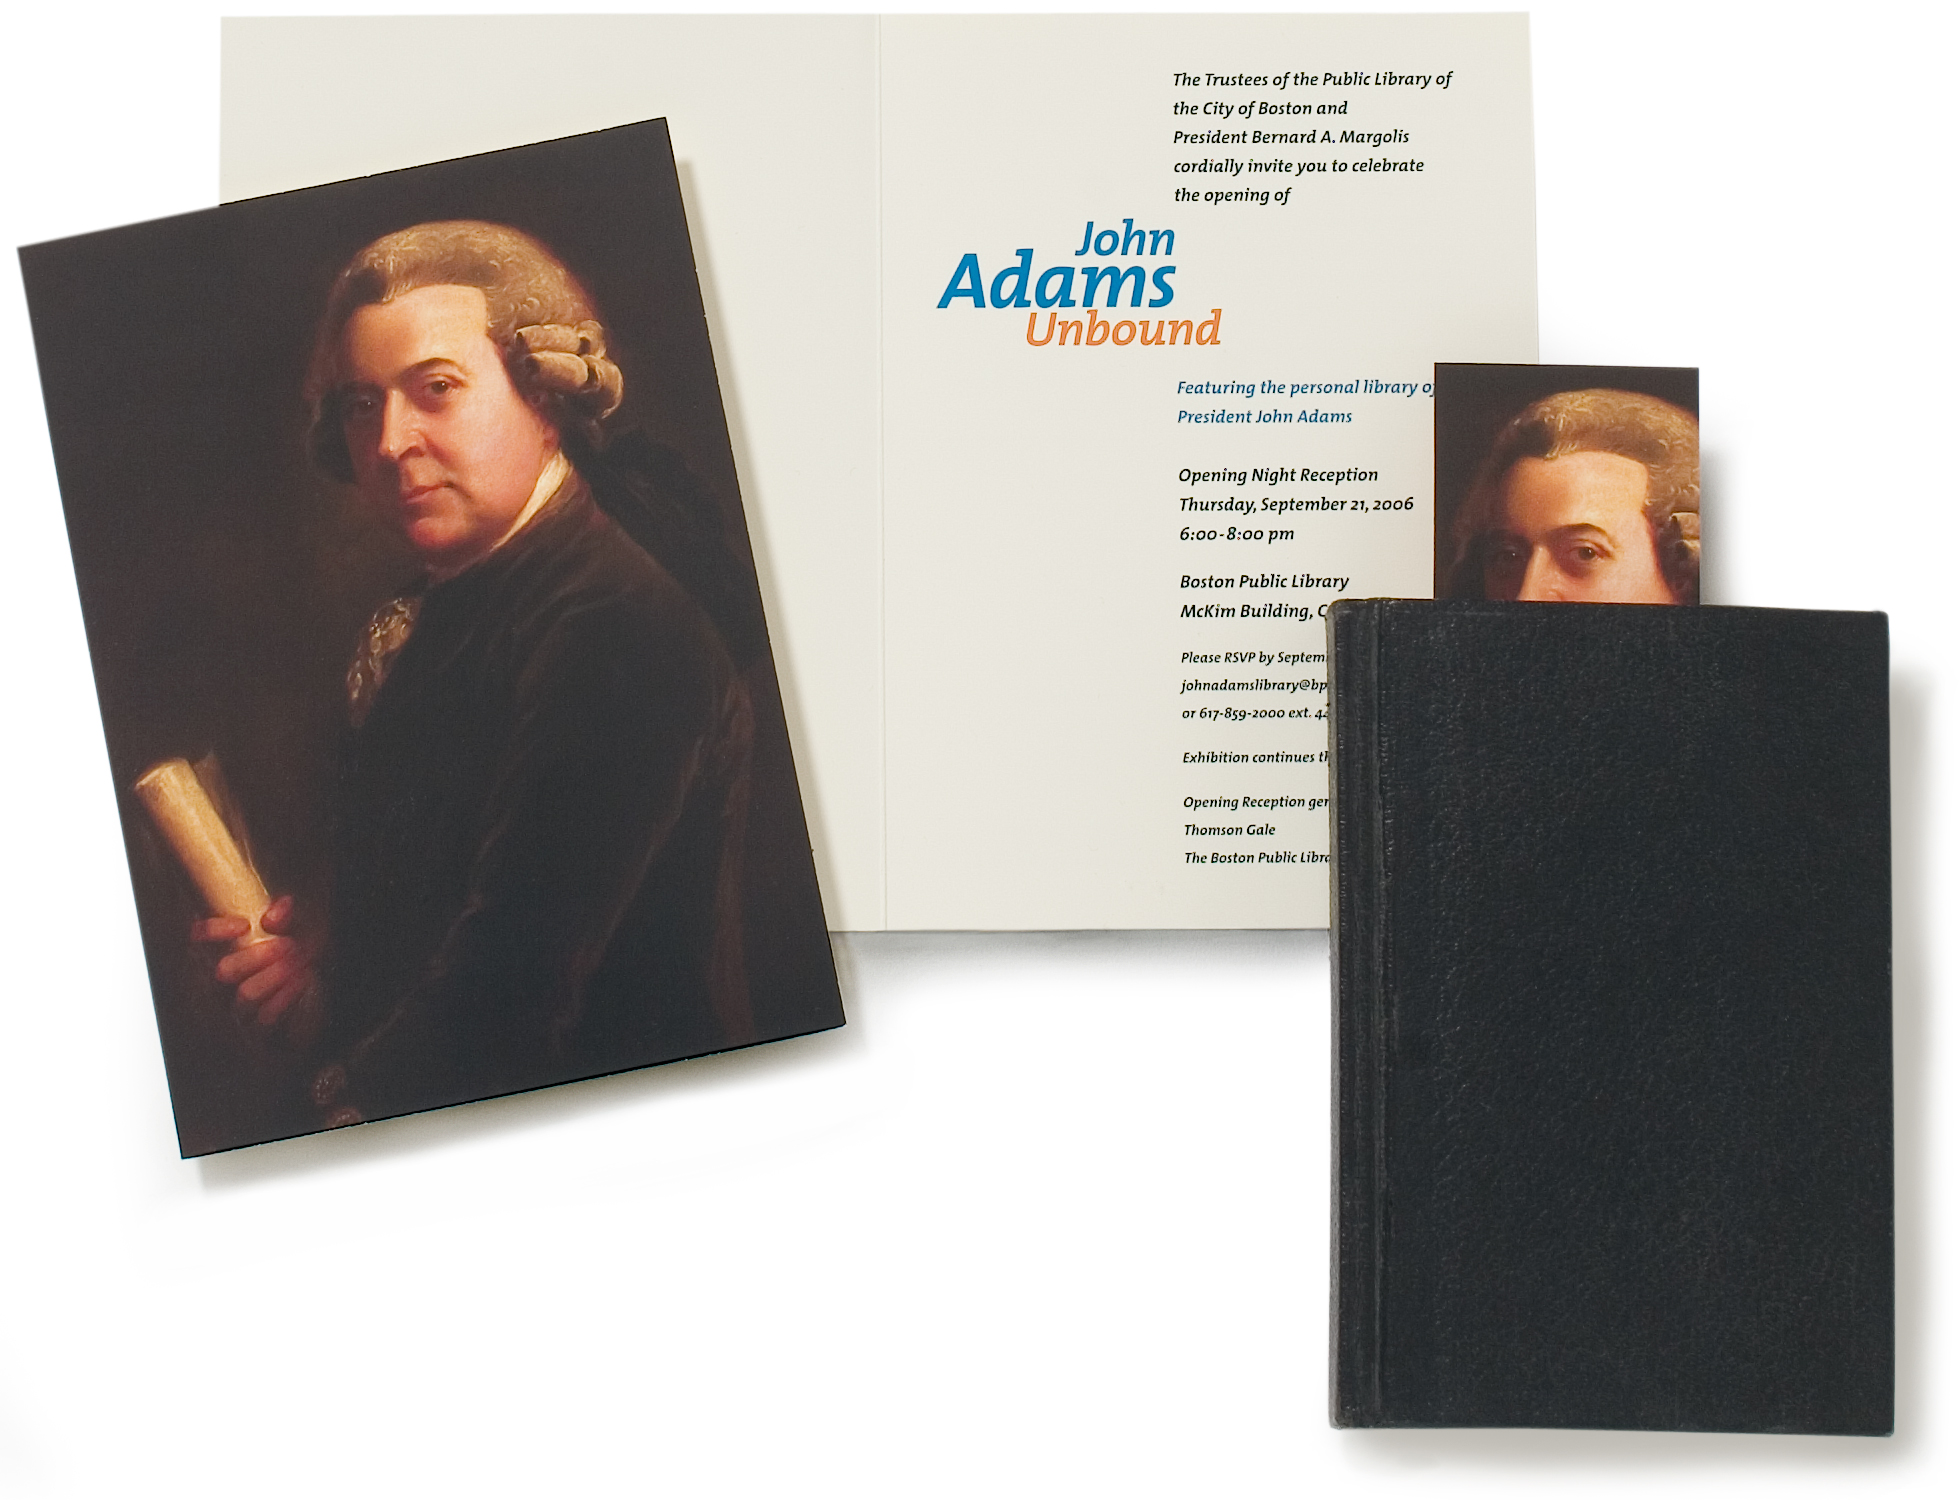 Project image 2 for "John Adams Unbound" Print, Boston Public Library 